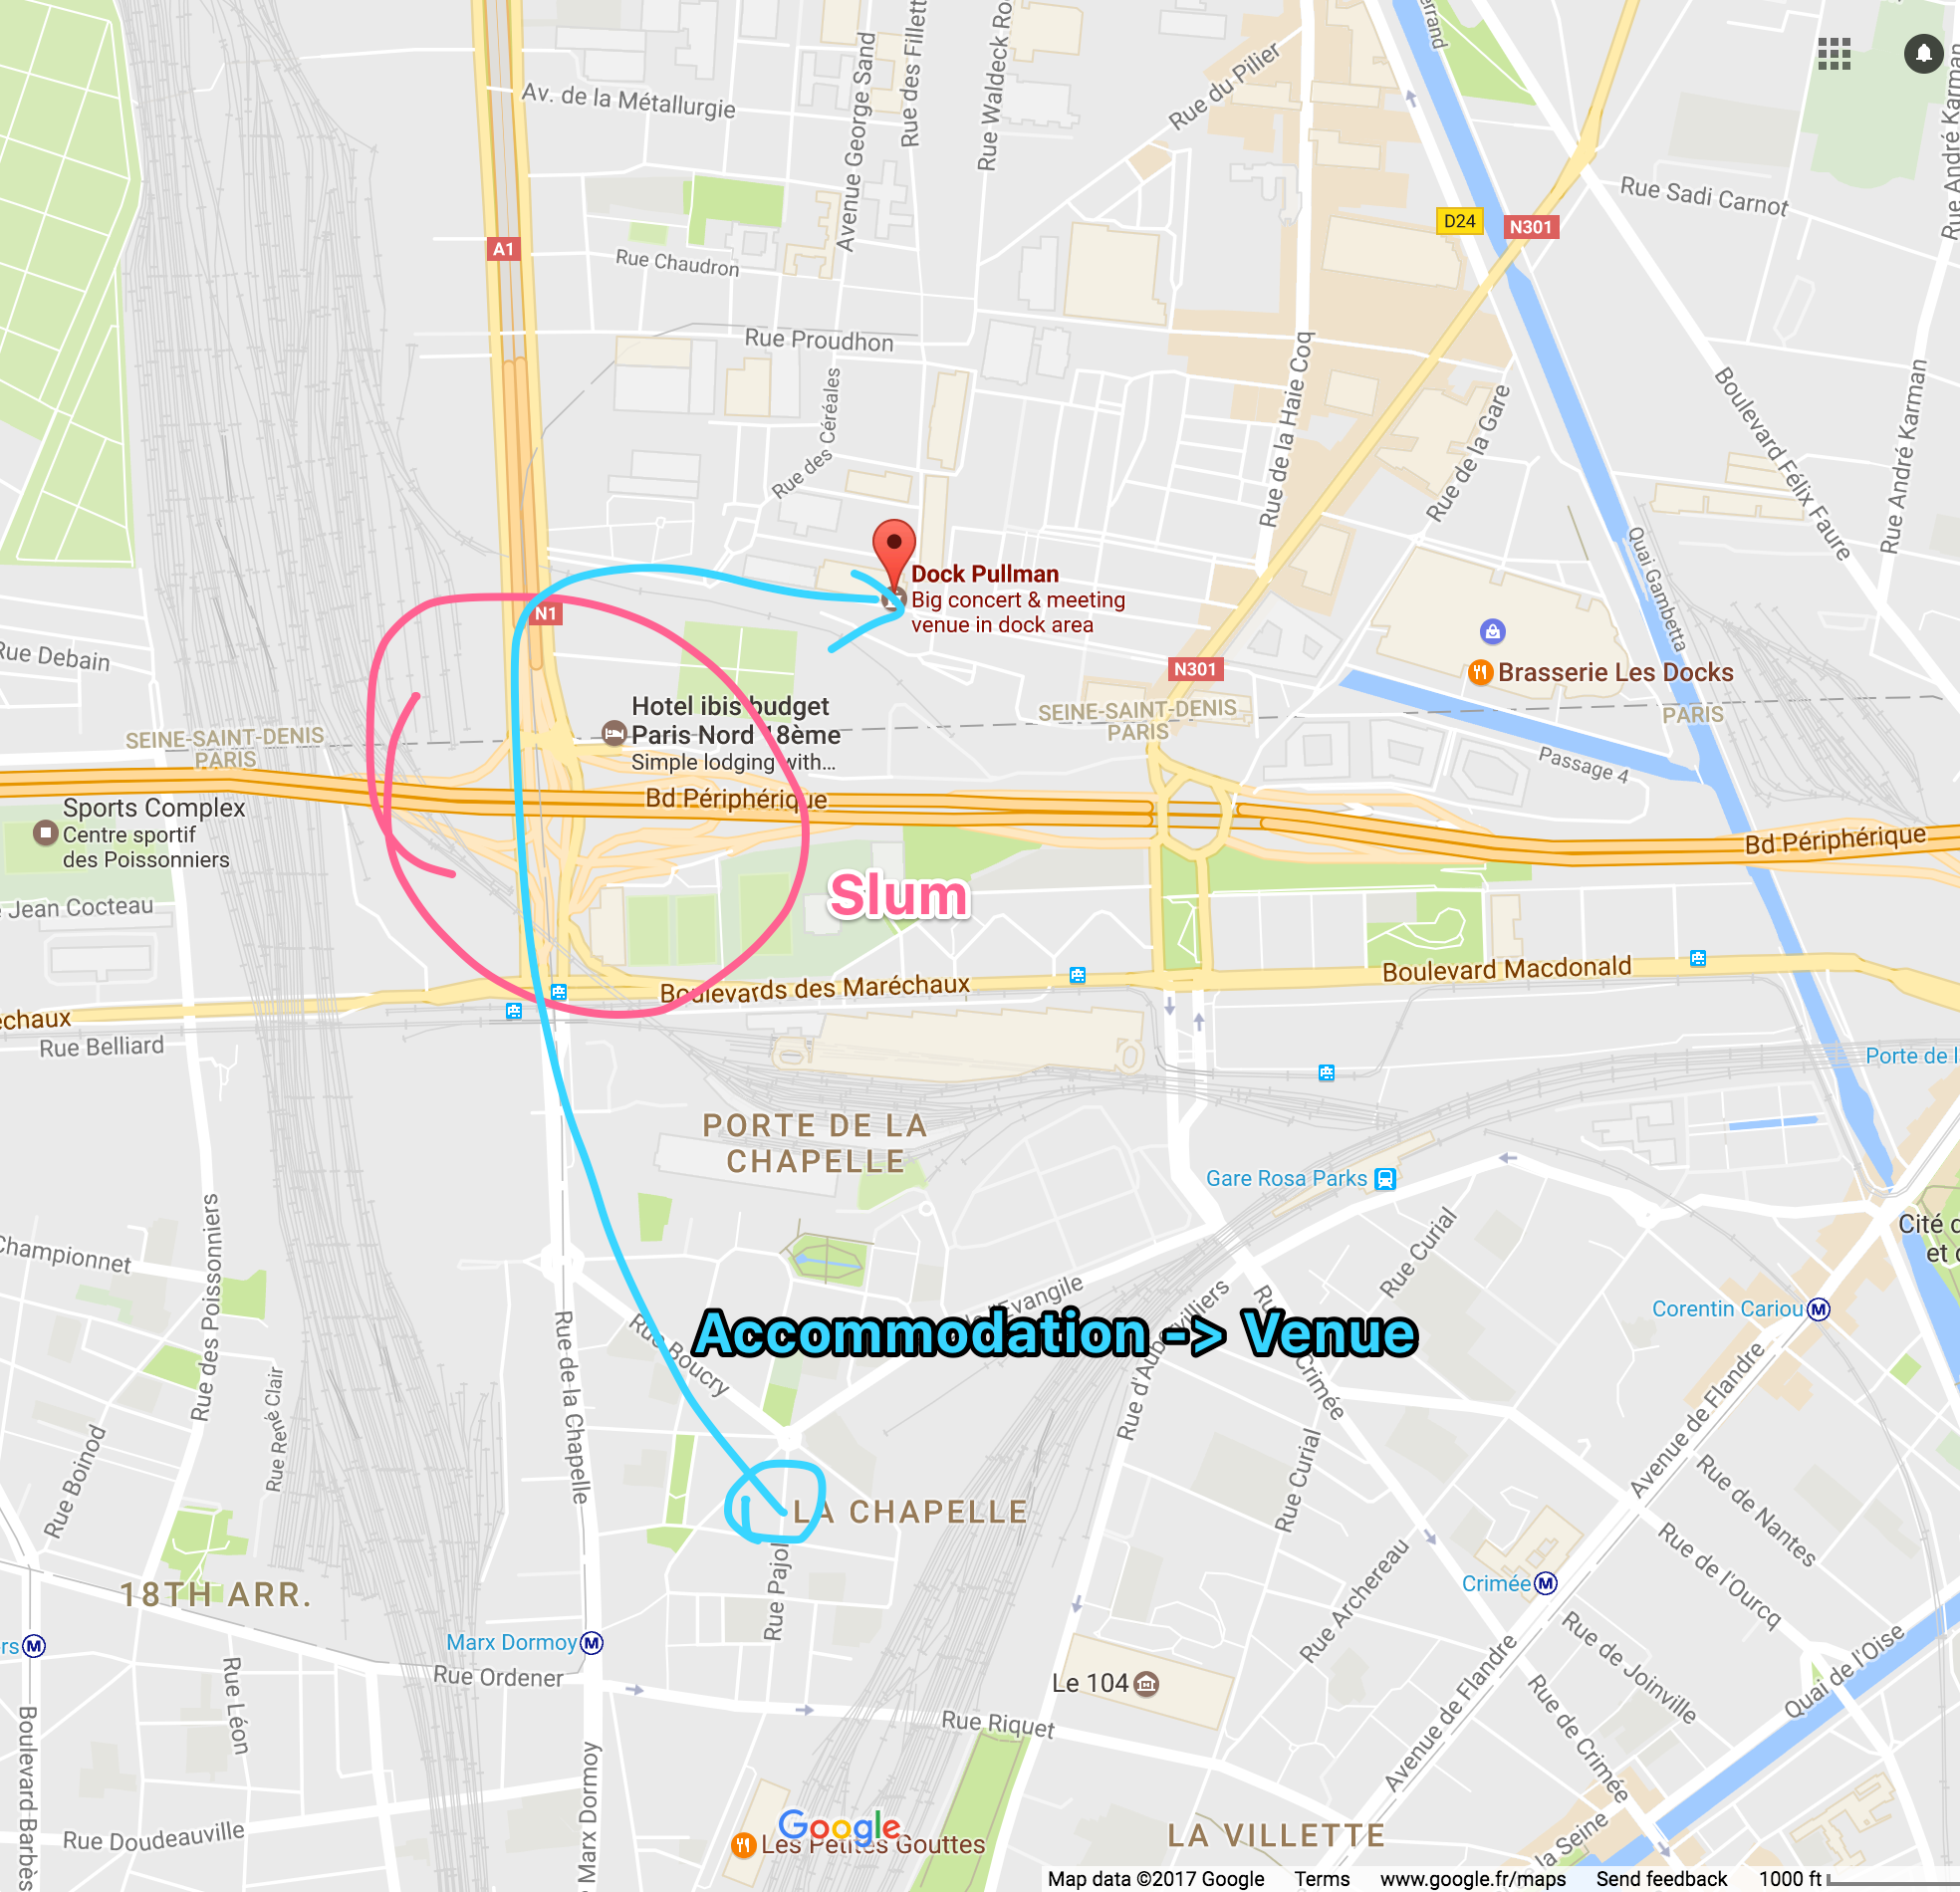 map of getting to the venue complete with slum